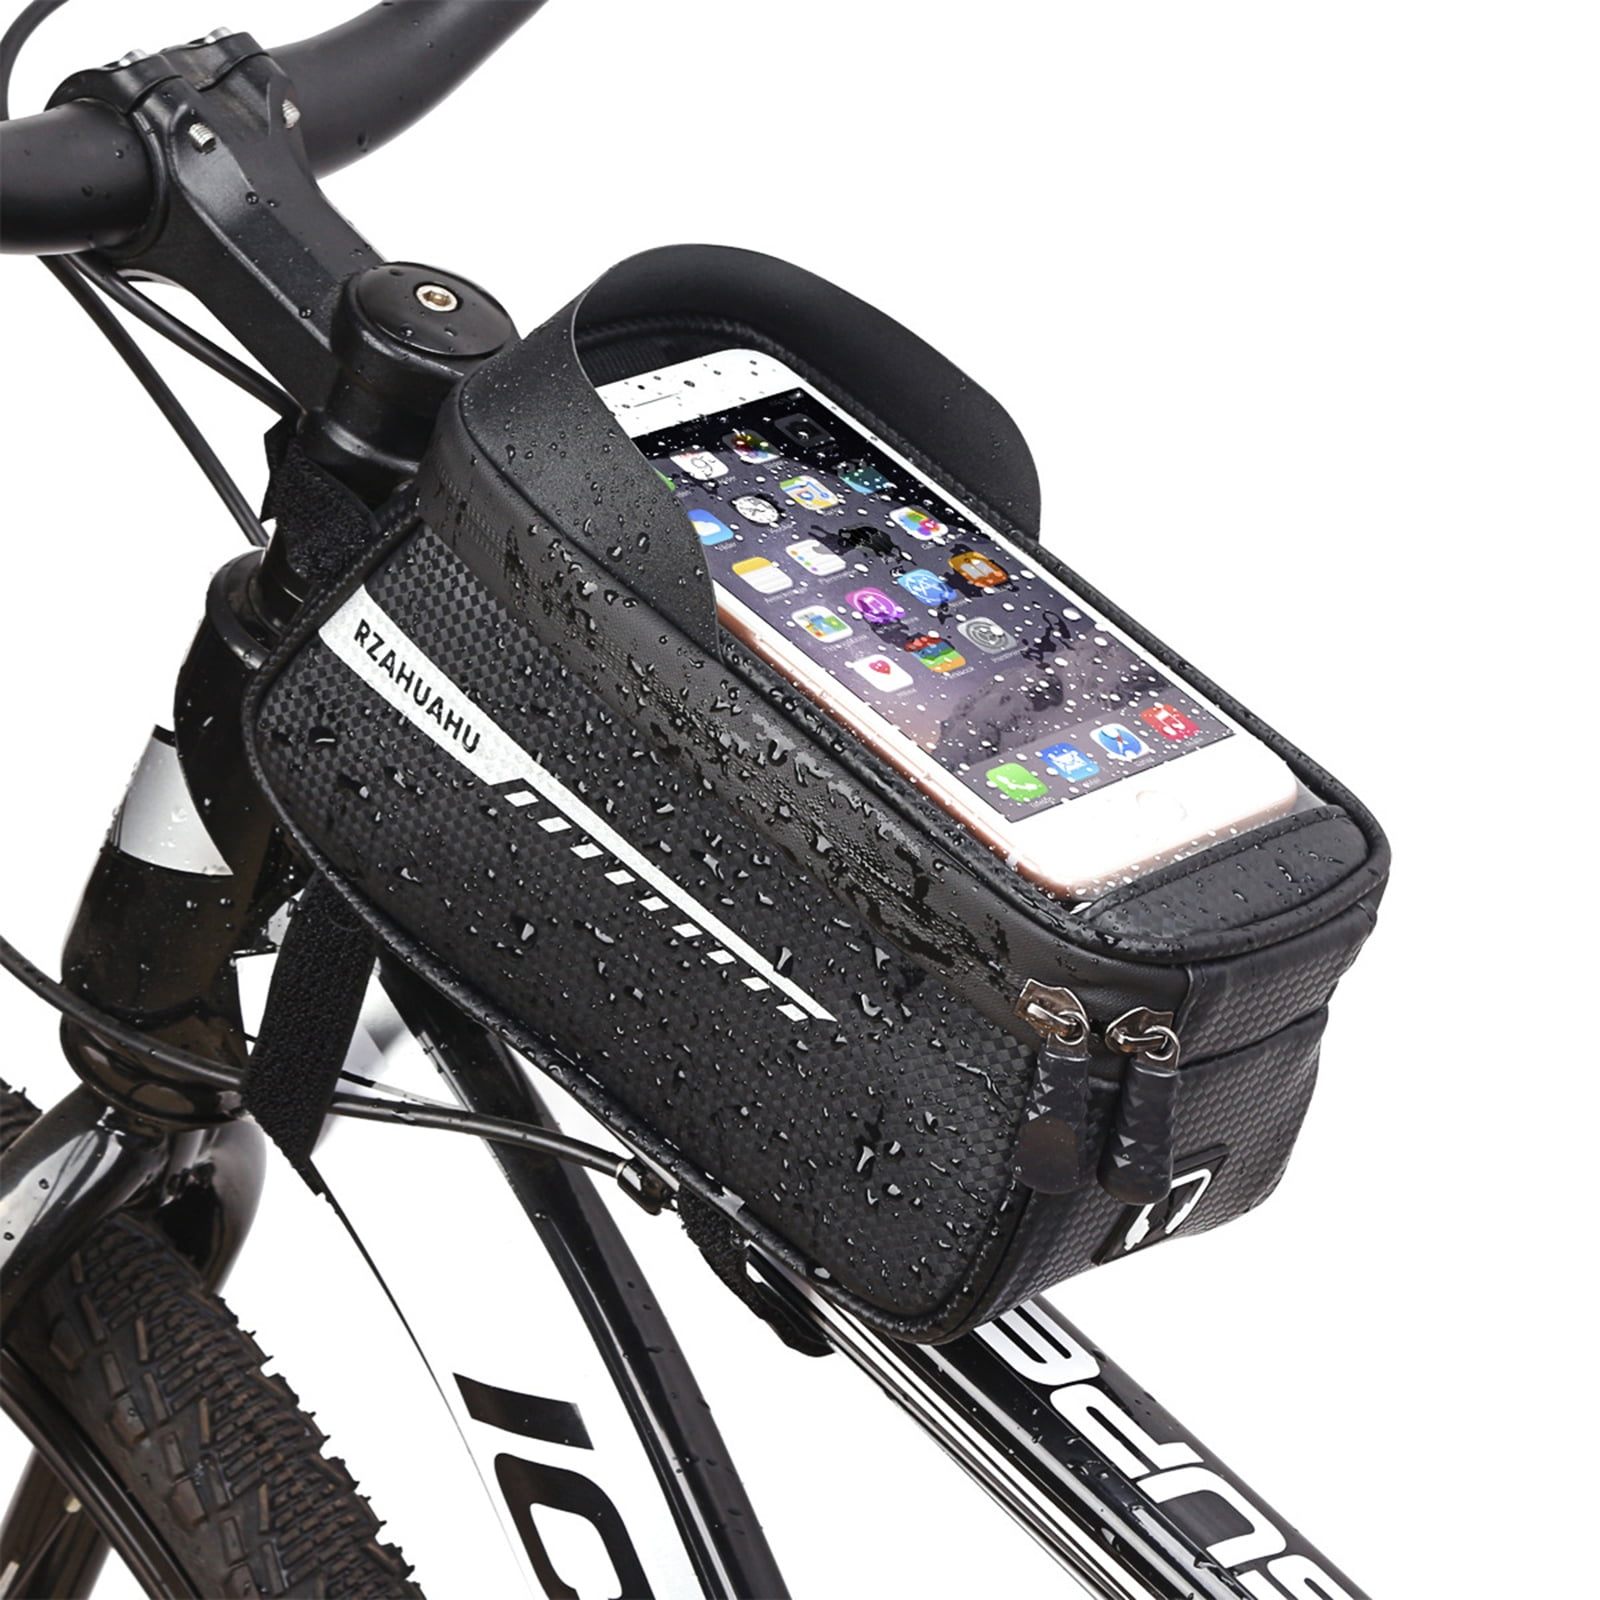 Details about   WILDMAN Bicycle 6.9" Touch Screen Phone Bag Waterproof Front Frame MTB Bike Bag 